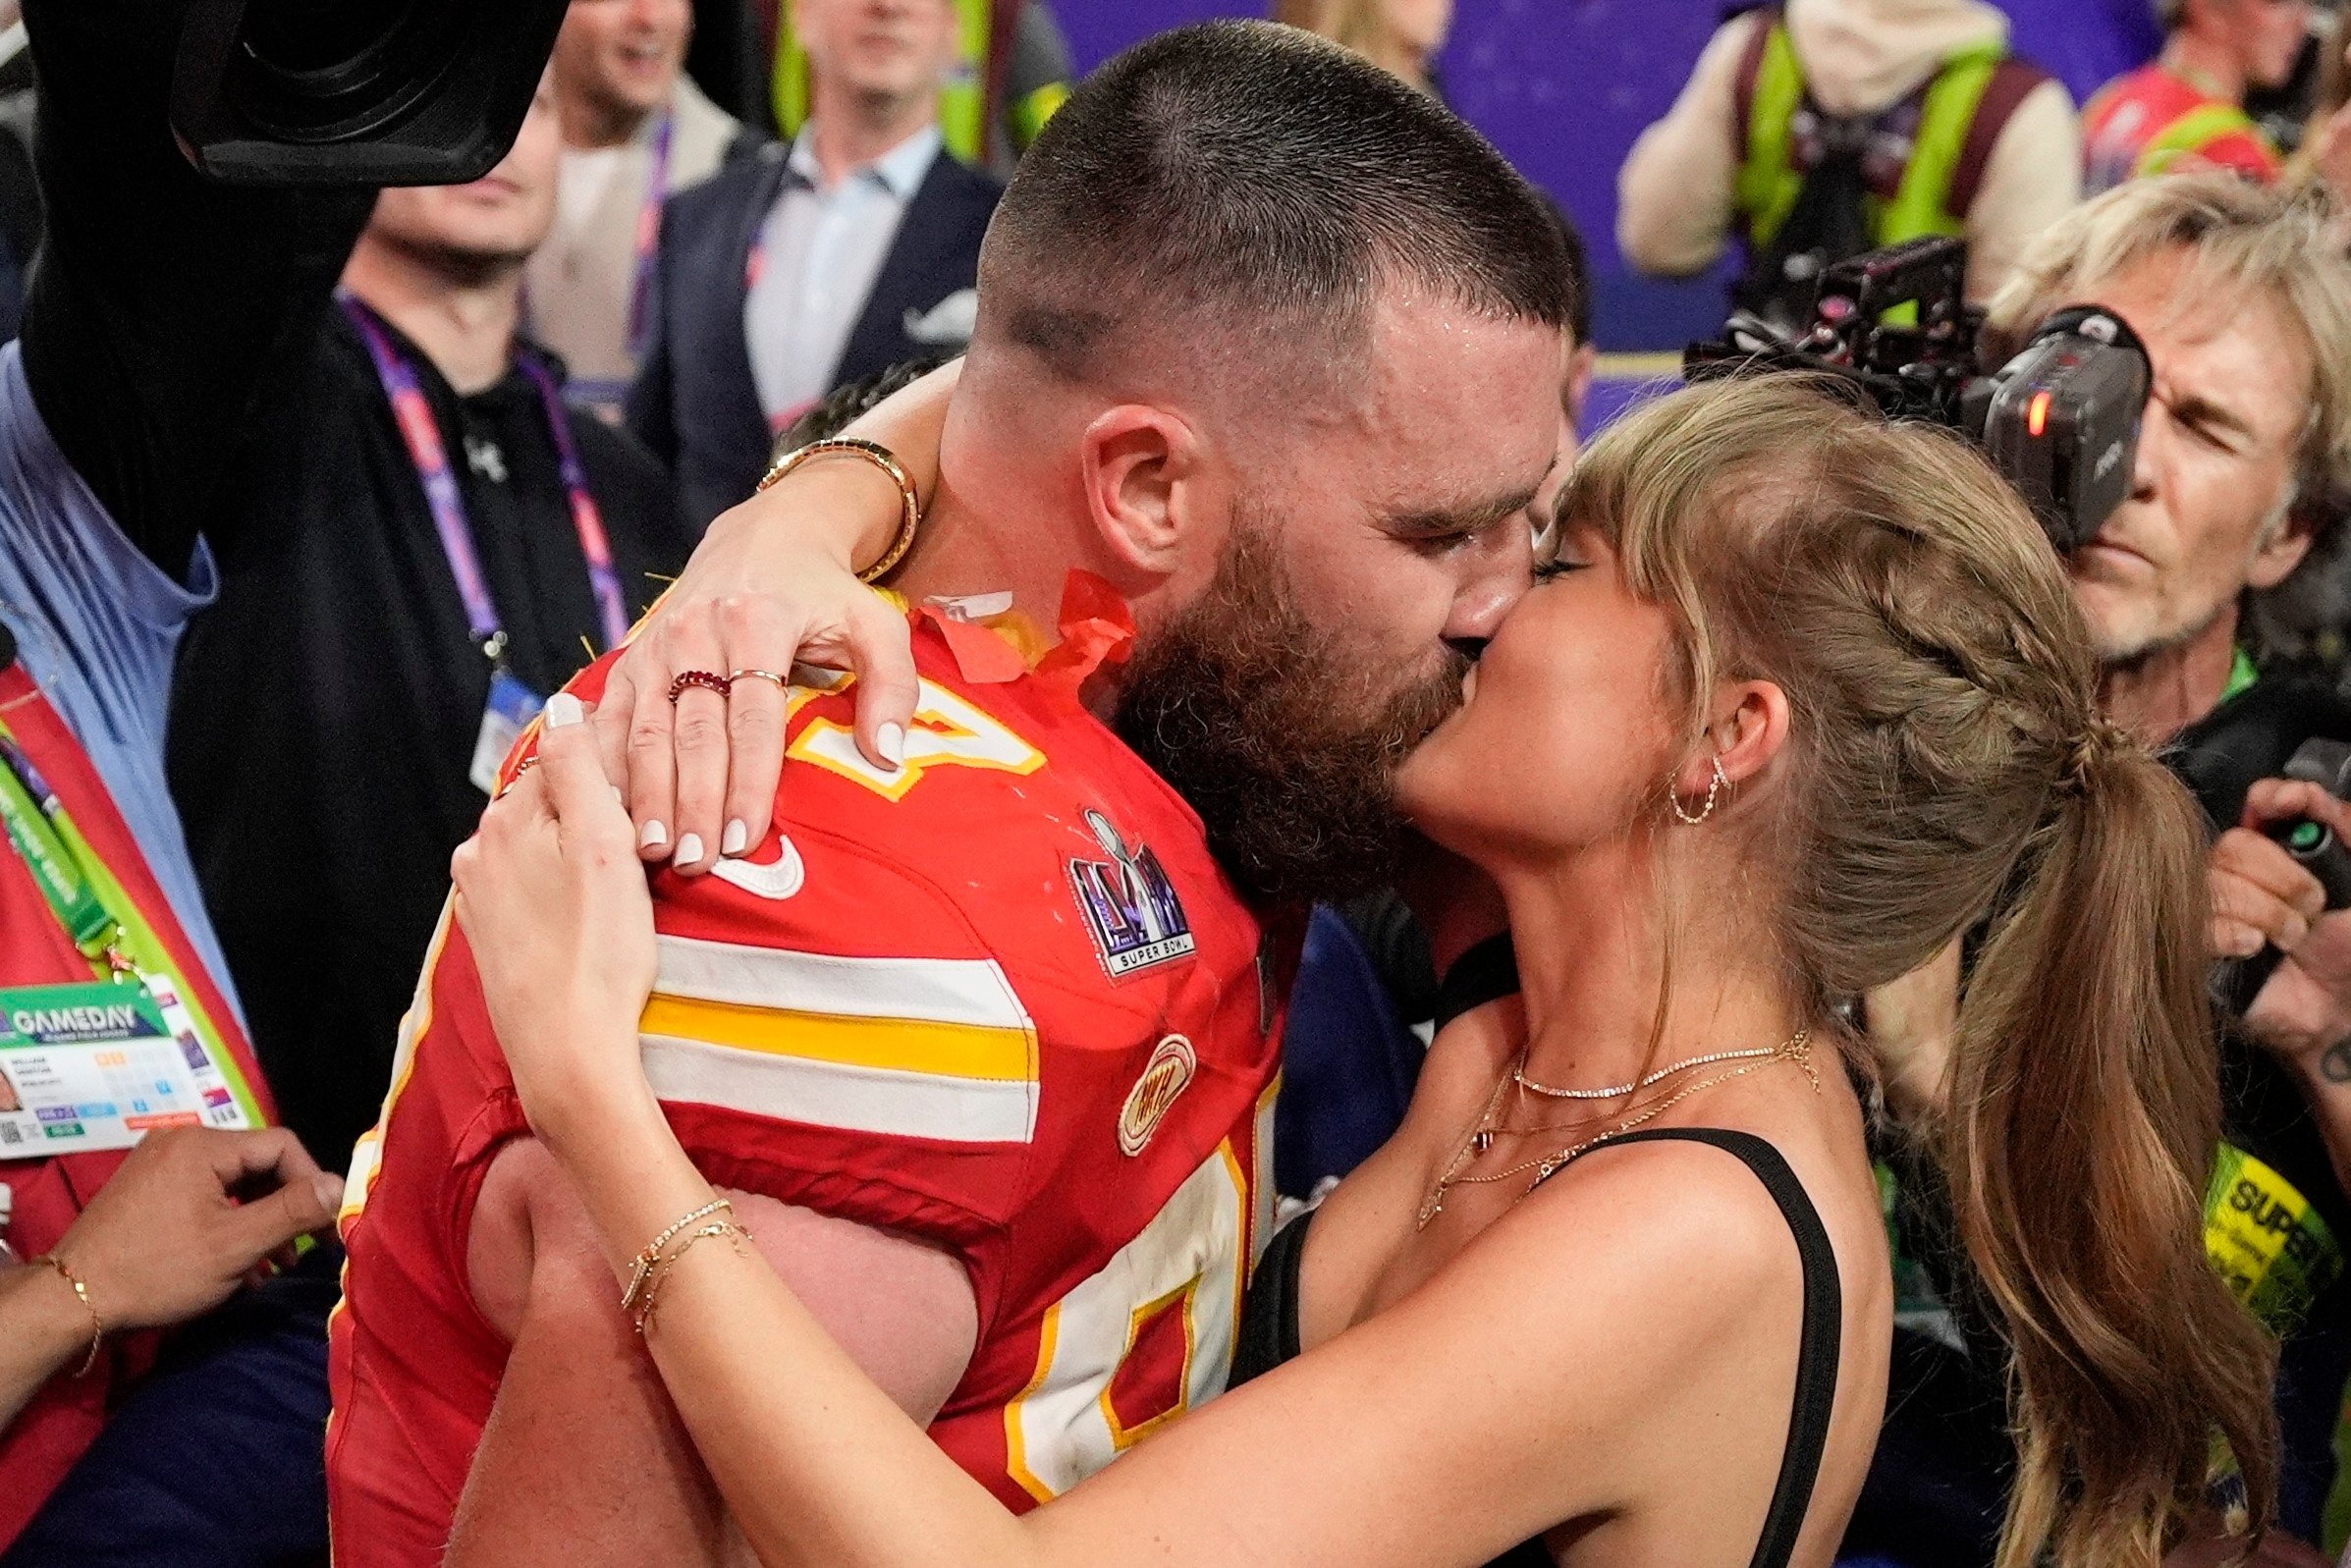 Kansas City Chiefs tight end Travis Kelce kisses Taylor Swift after Super Bowl victory. Photo: AP Photo